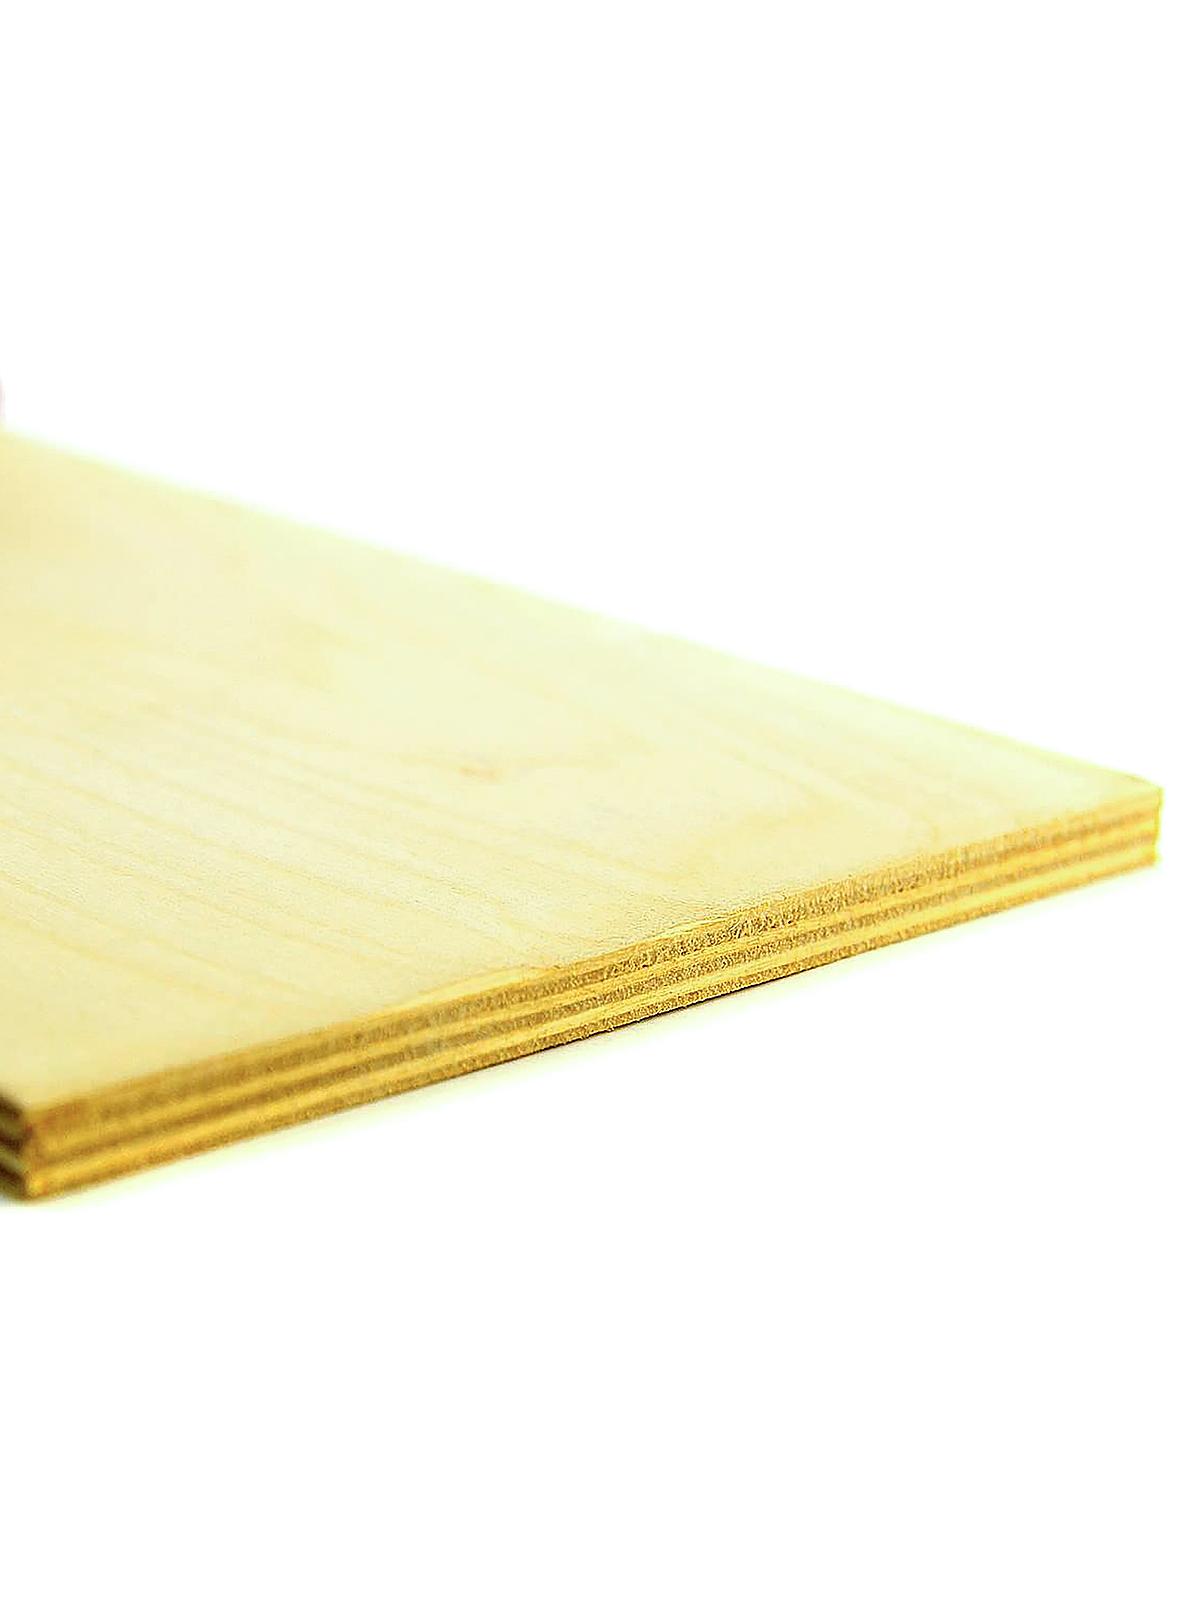 Craft Plywood Sheets 3 8 In. 6 In. X 12 In.